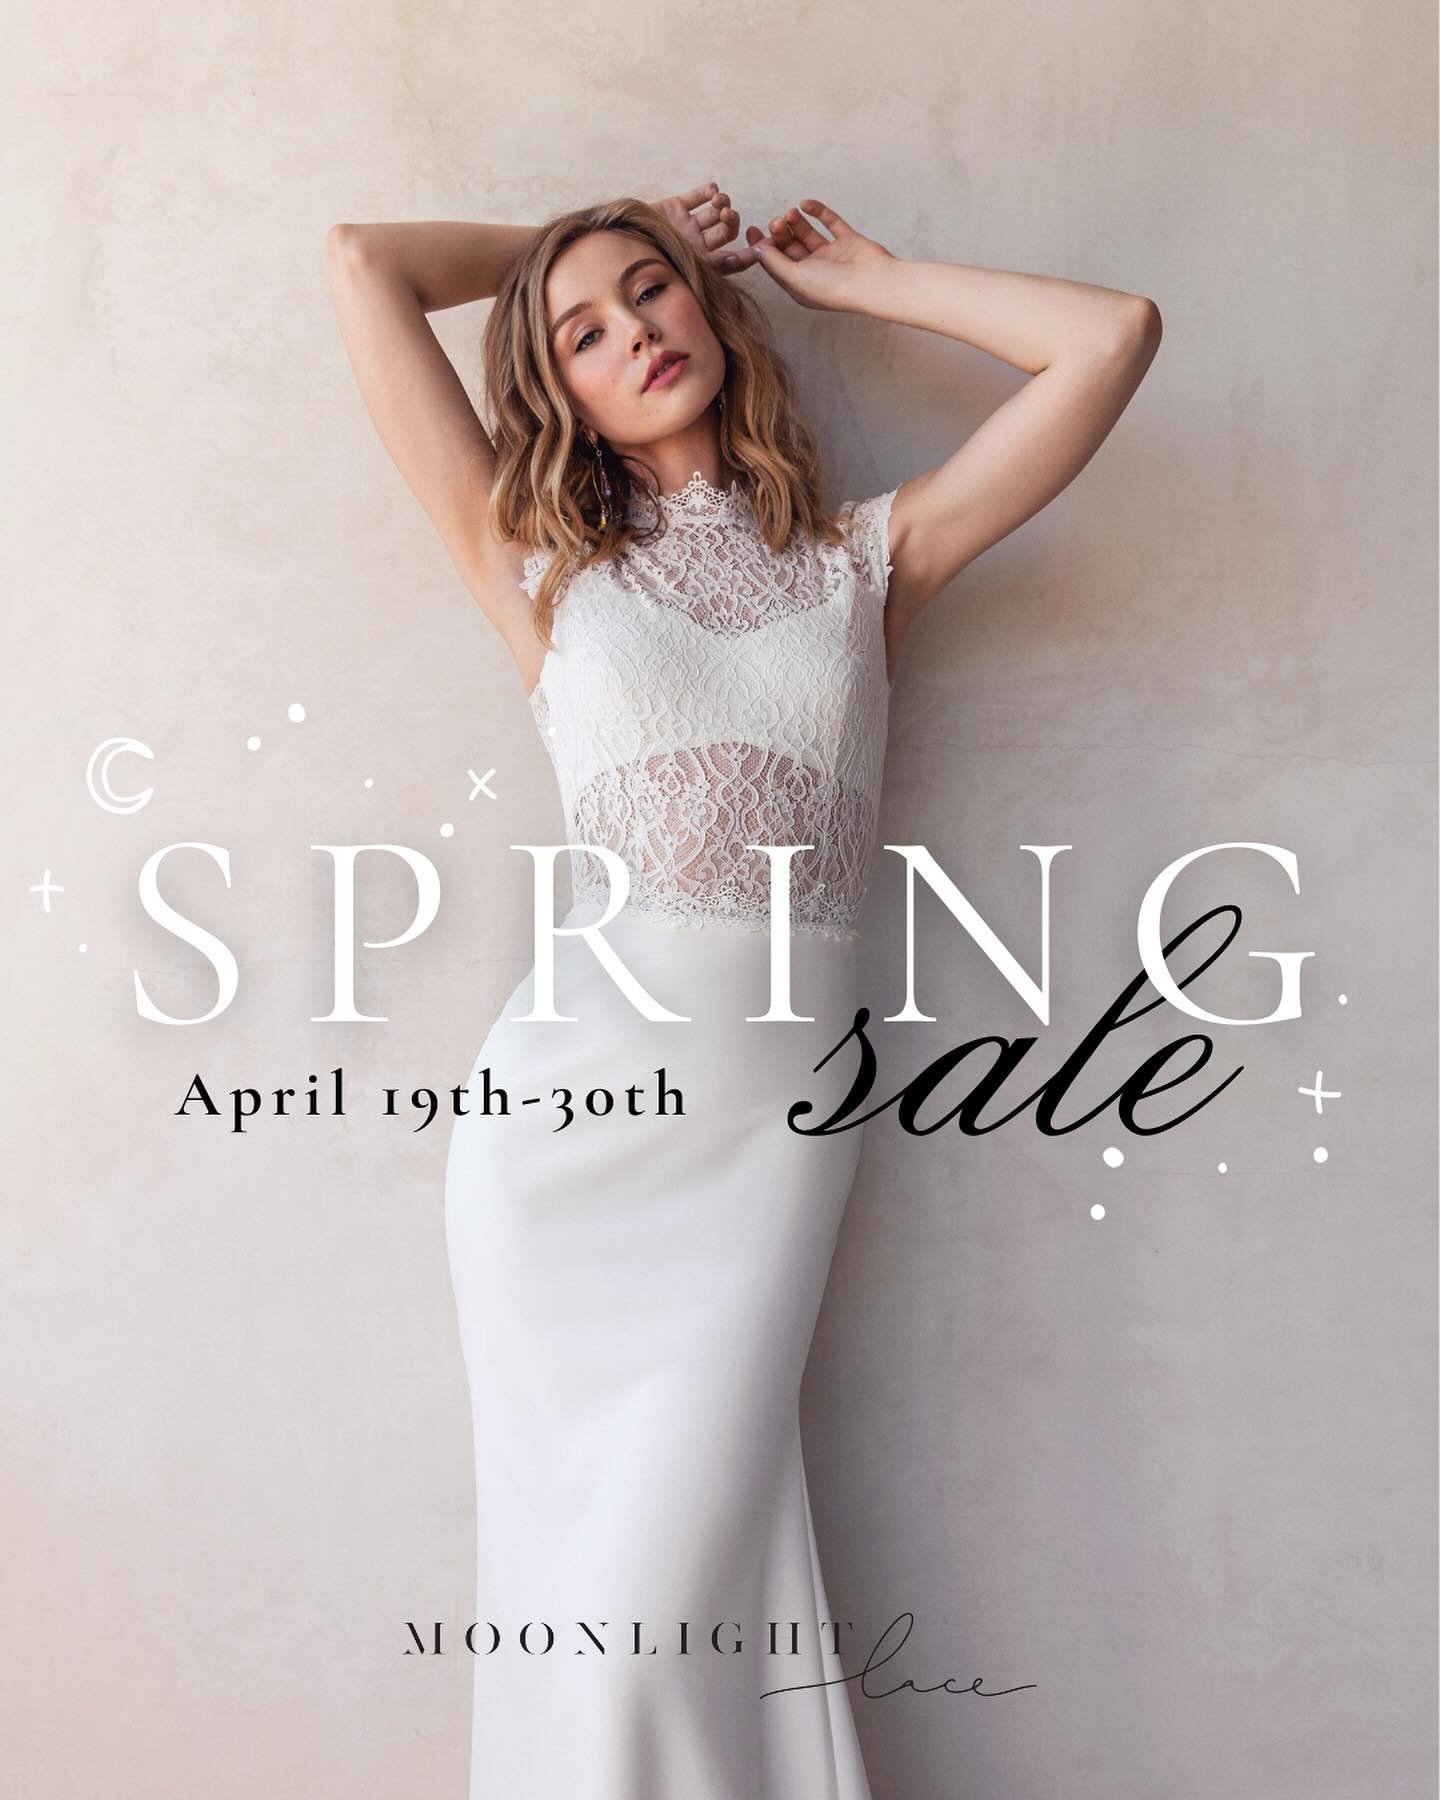 SALE ALERT 💚 Shop our Spring Sale online or in store for the rest of the month of April! This is the perfect opportunity to polish off your wedding day look, stock up on necessities for your bridal era, or even score a wedding gown for a beautifully